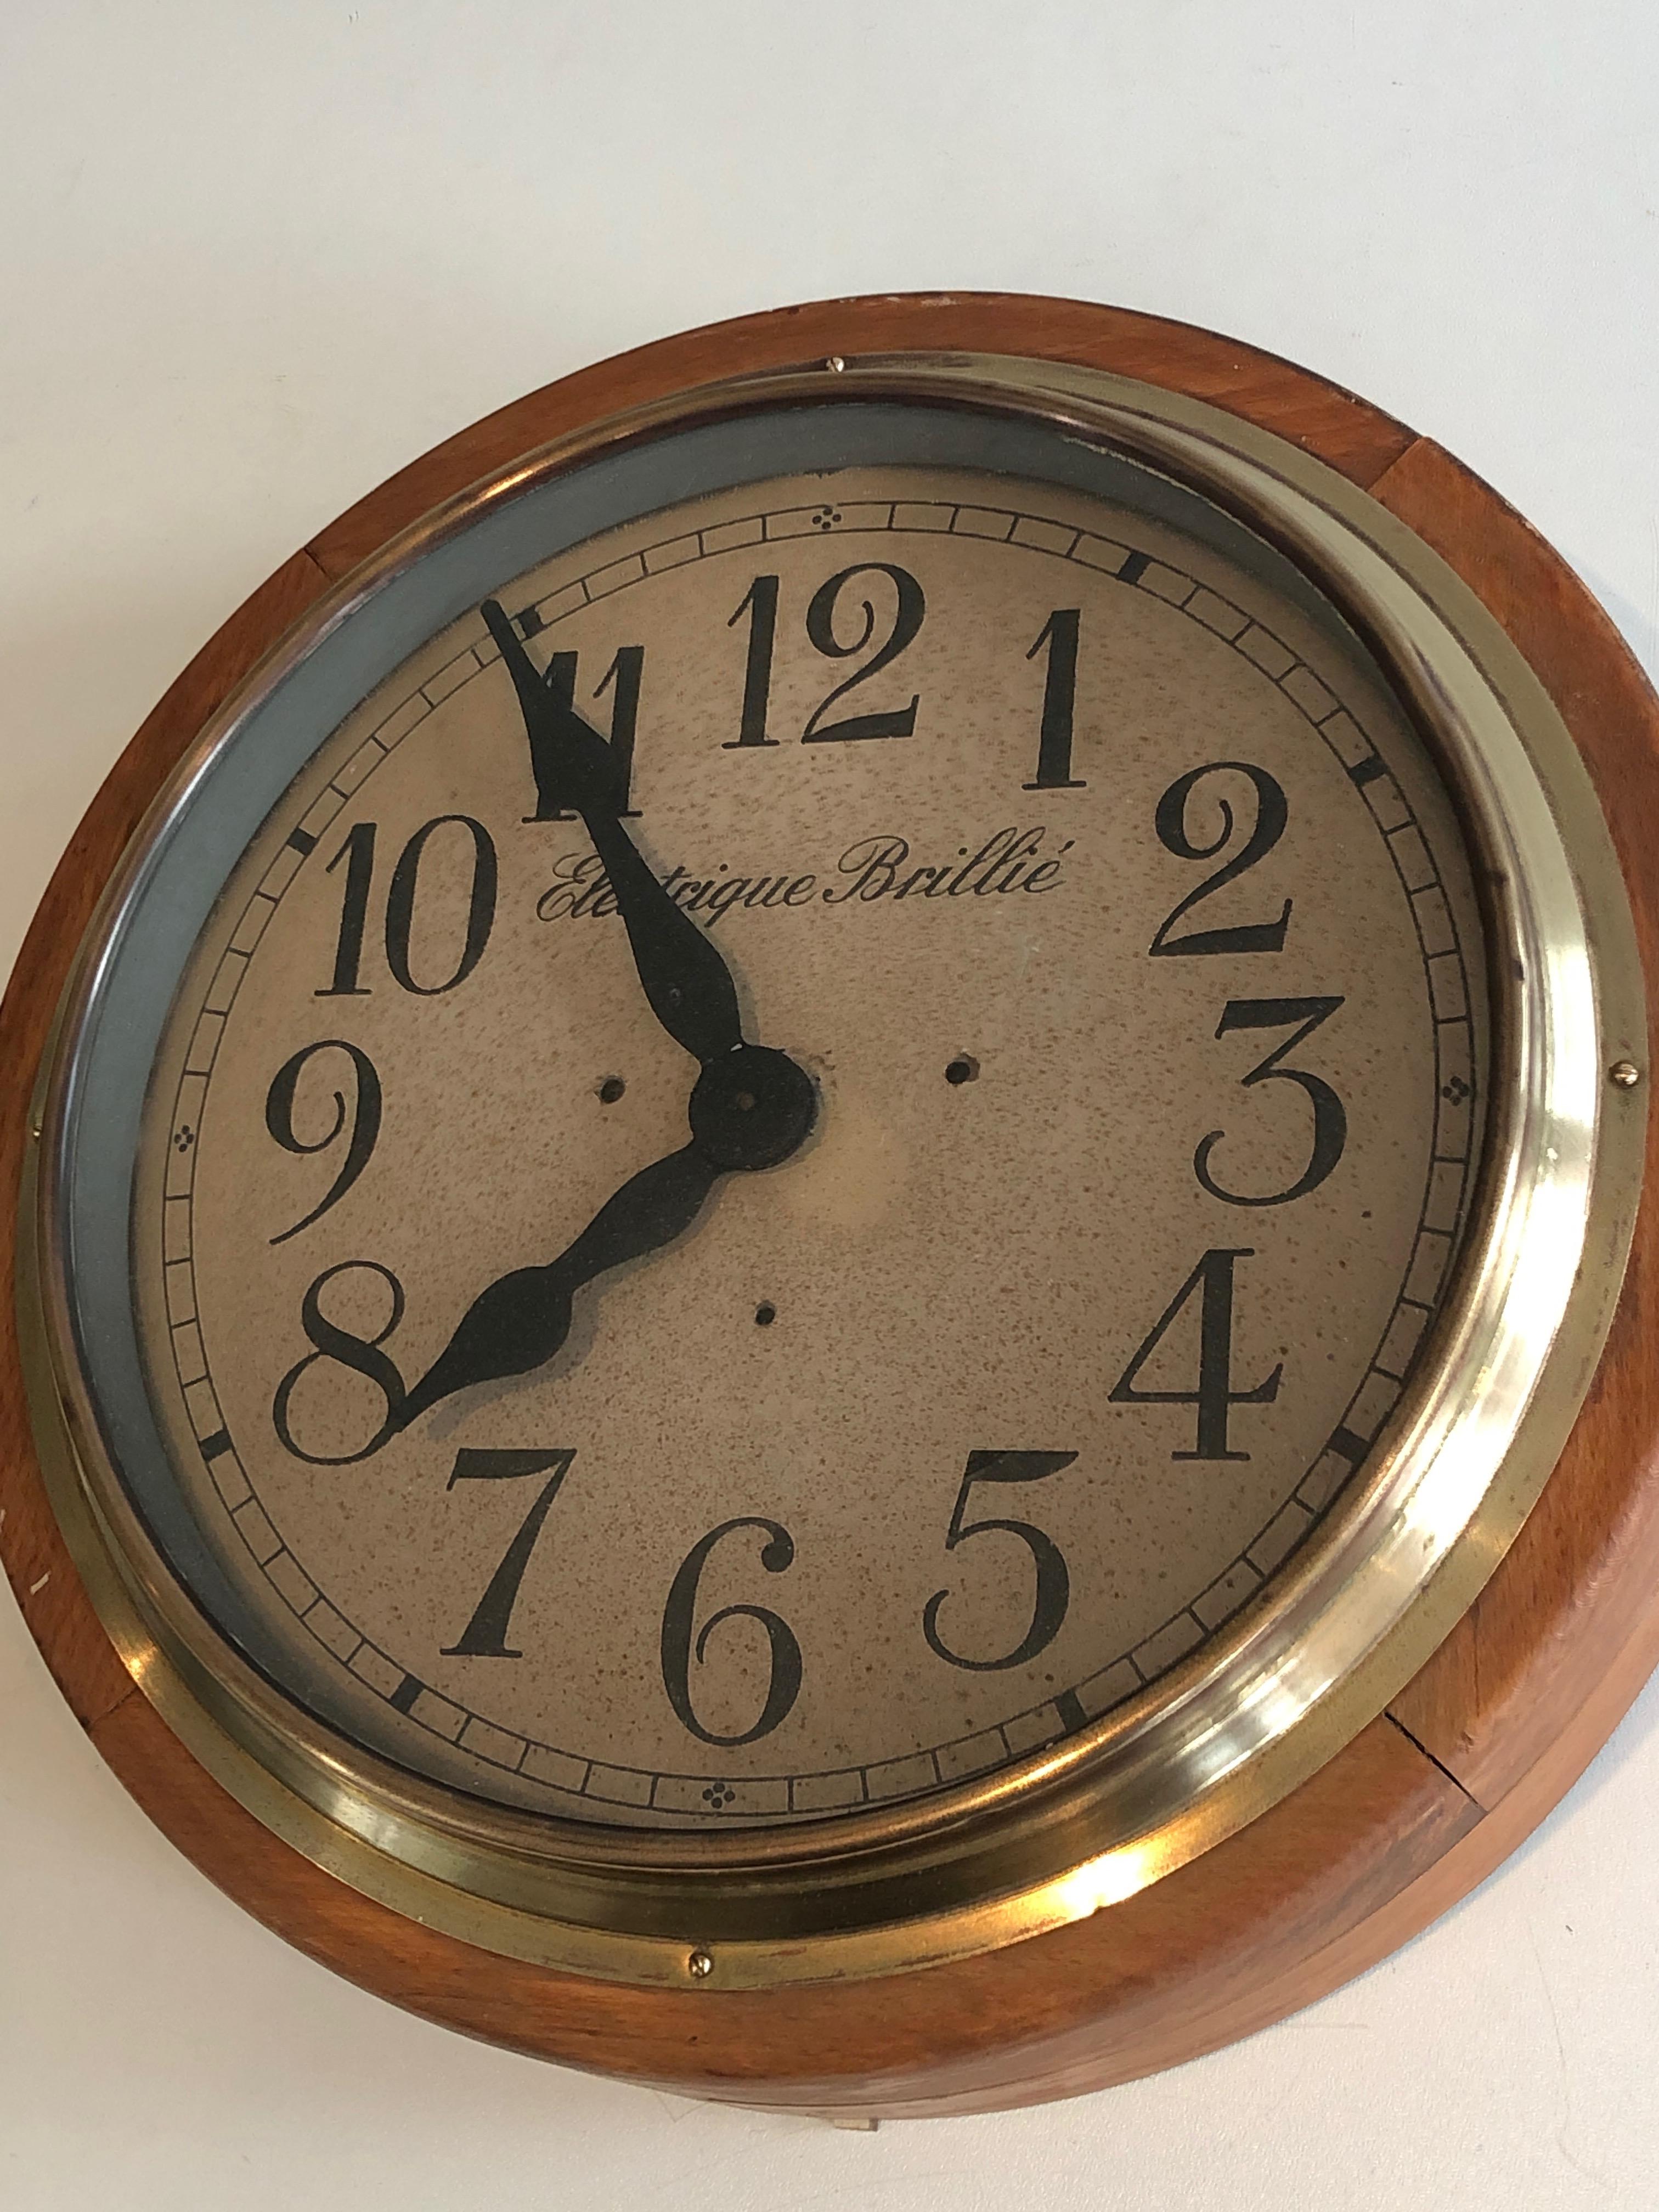 Early 20th Century Wood and Brass Clock, Signed Electrique Brillé, French, Circa 1900